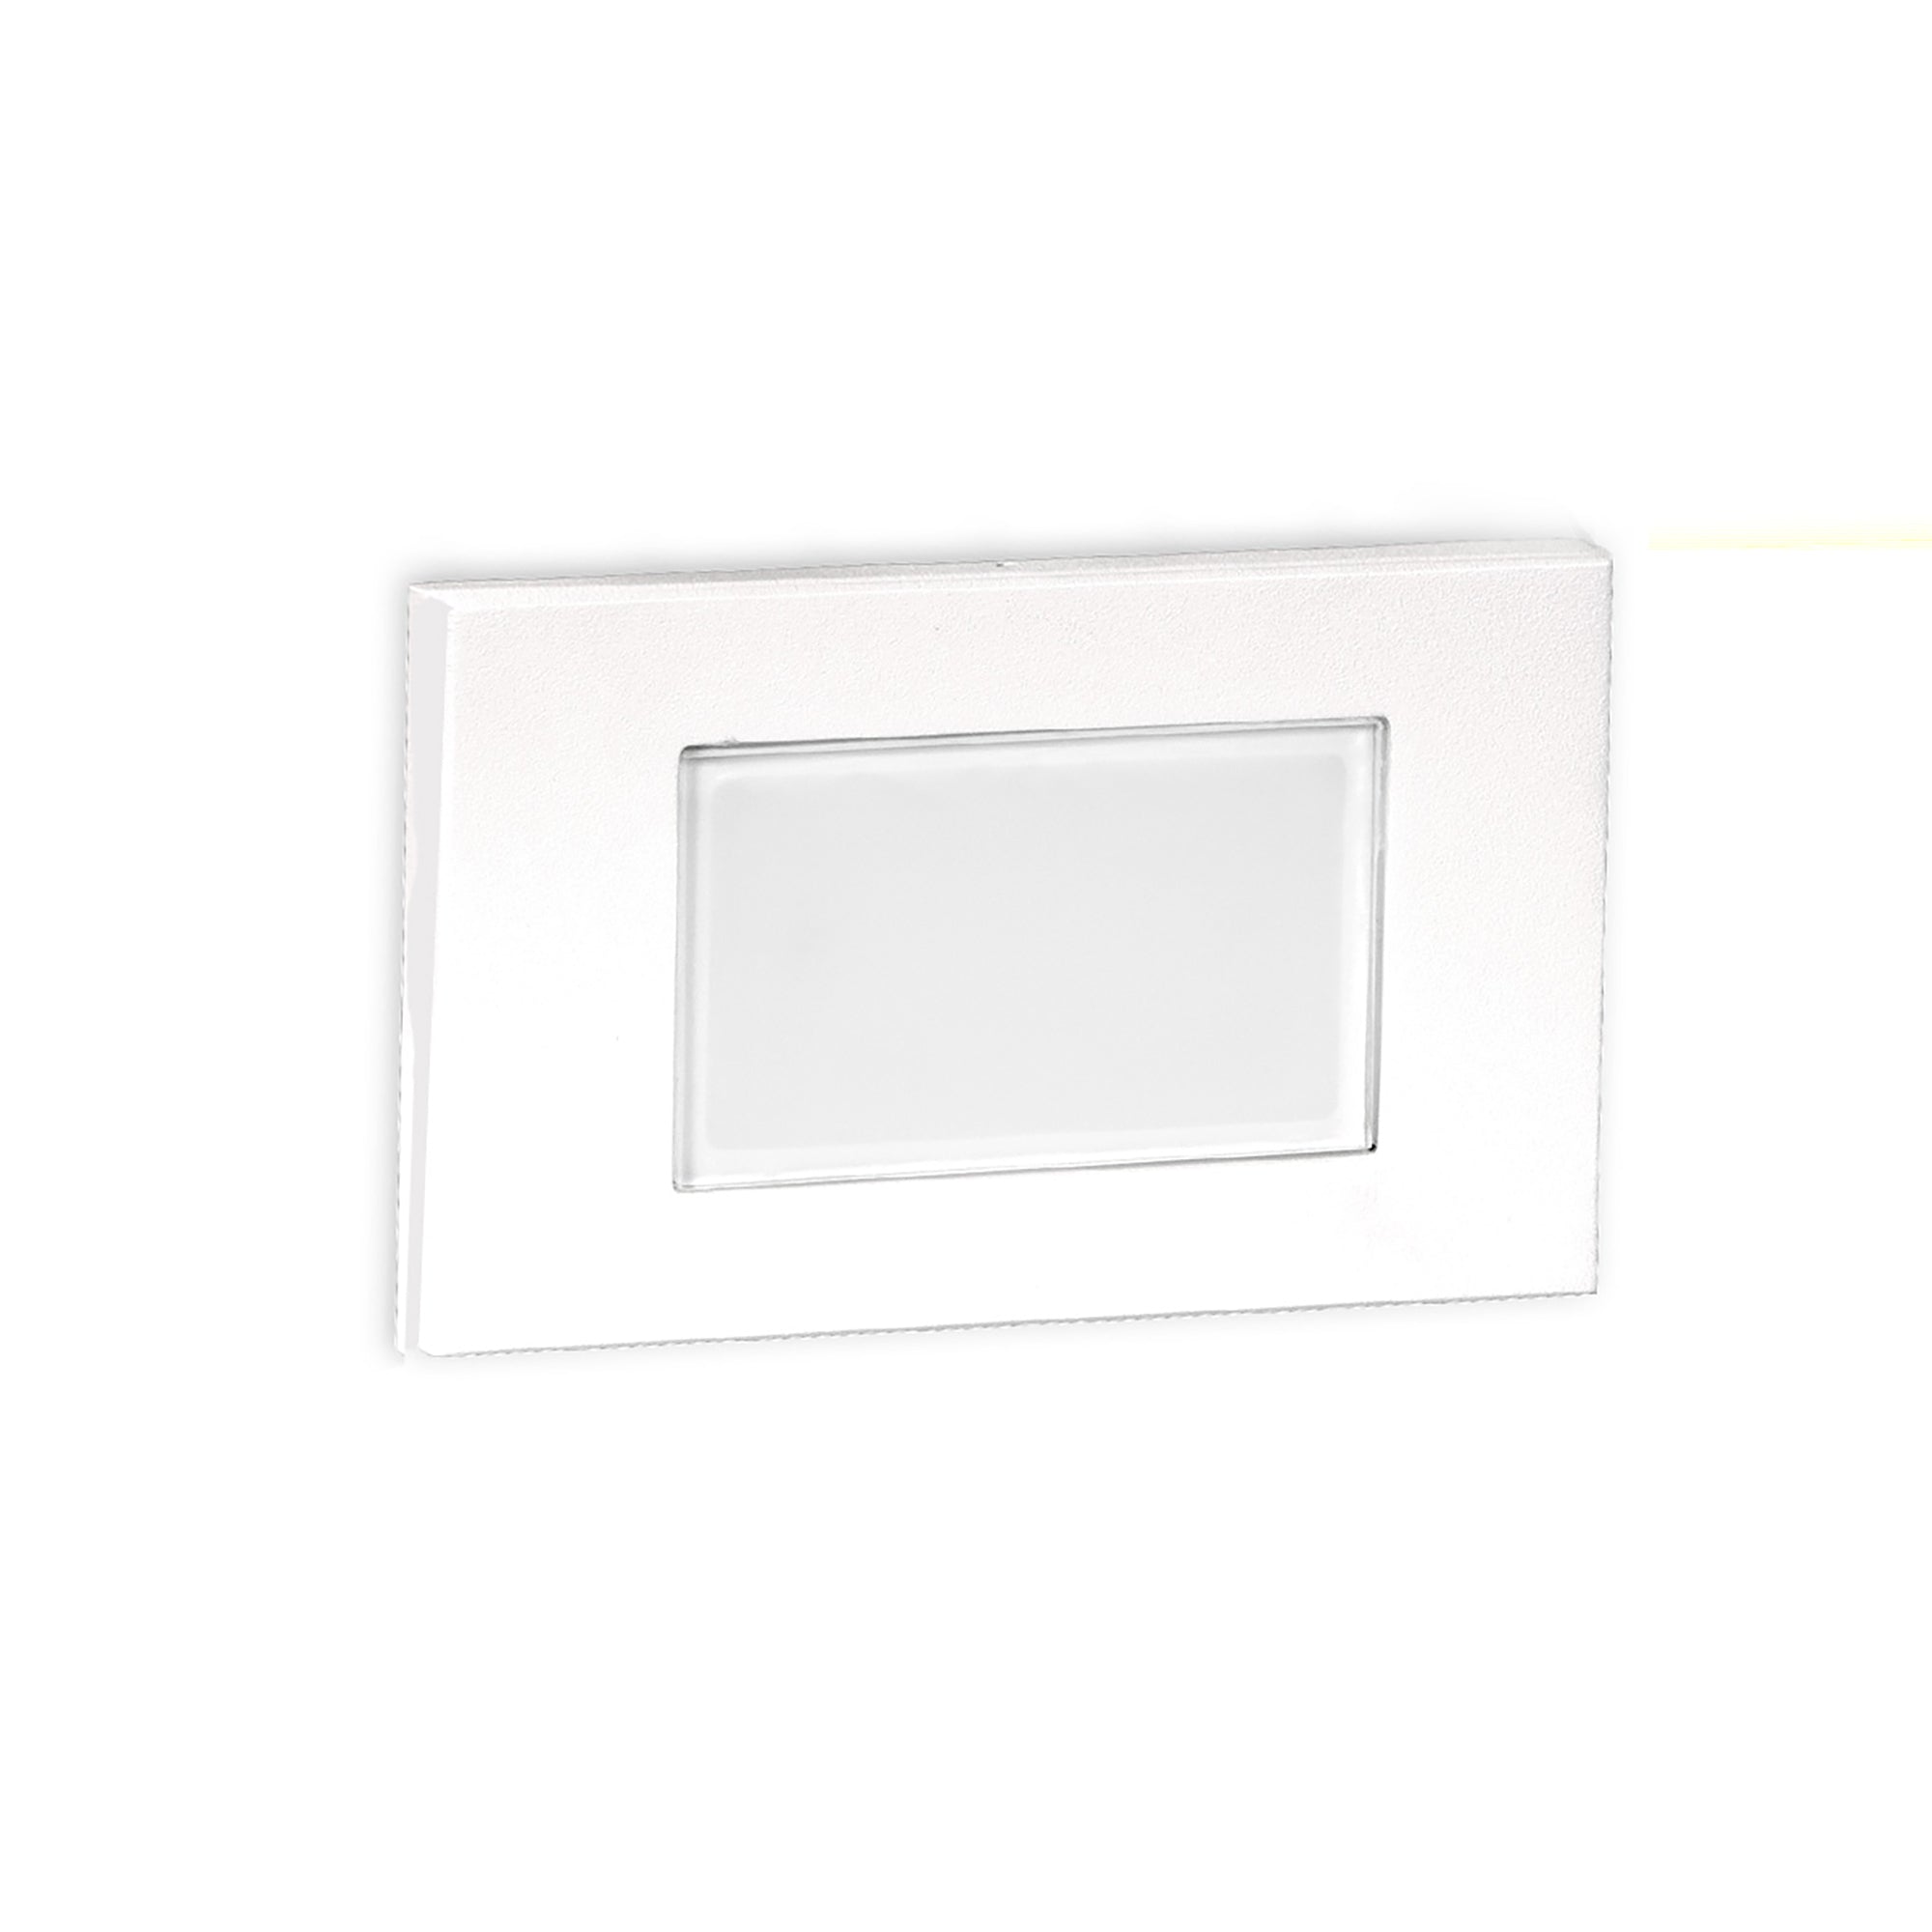 LED 12V Diffused Indoor/Outdoor Step and Wall Light